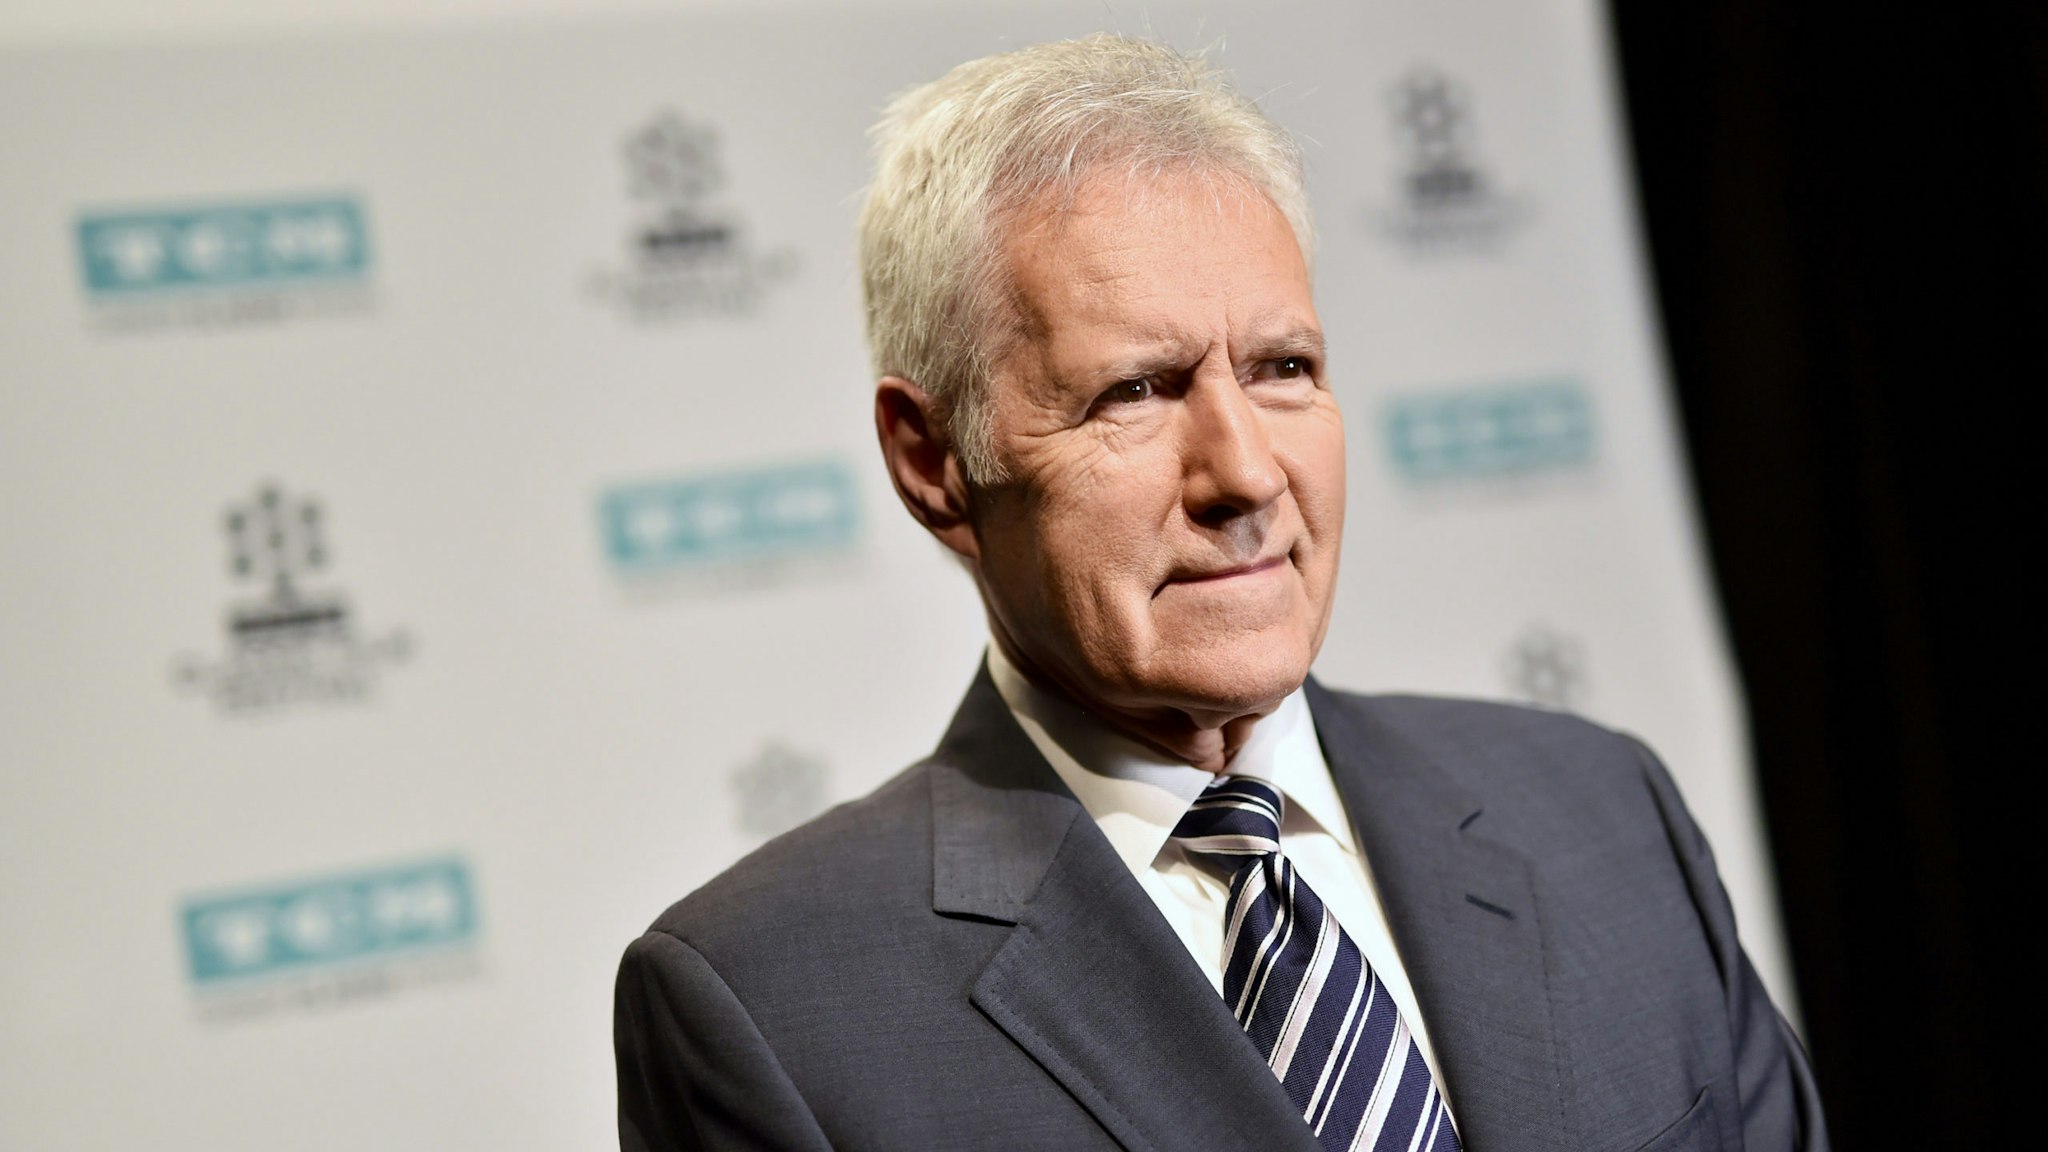 LOS ANGELES, CA - APRIL 07: TV personality Alex Trebek attends the screening of 'The Bridge on The River Kwai' during the 2017 TCM Classic Film Festival on April 7, 2017 in Los Angeles, California. 26657_004 (Photo by Emma McIntyre/Getty Images for TCM)